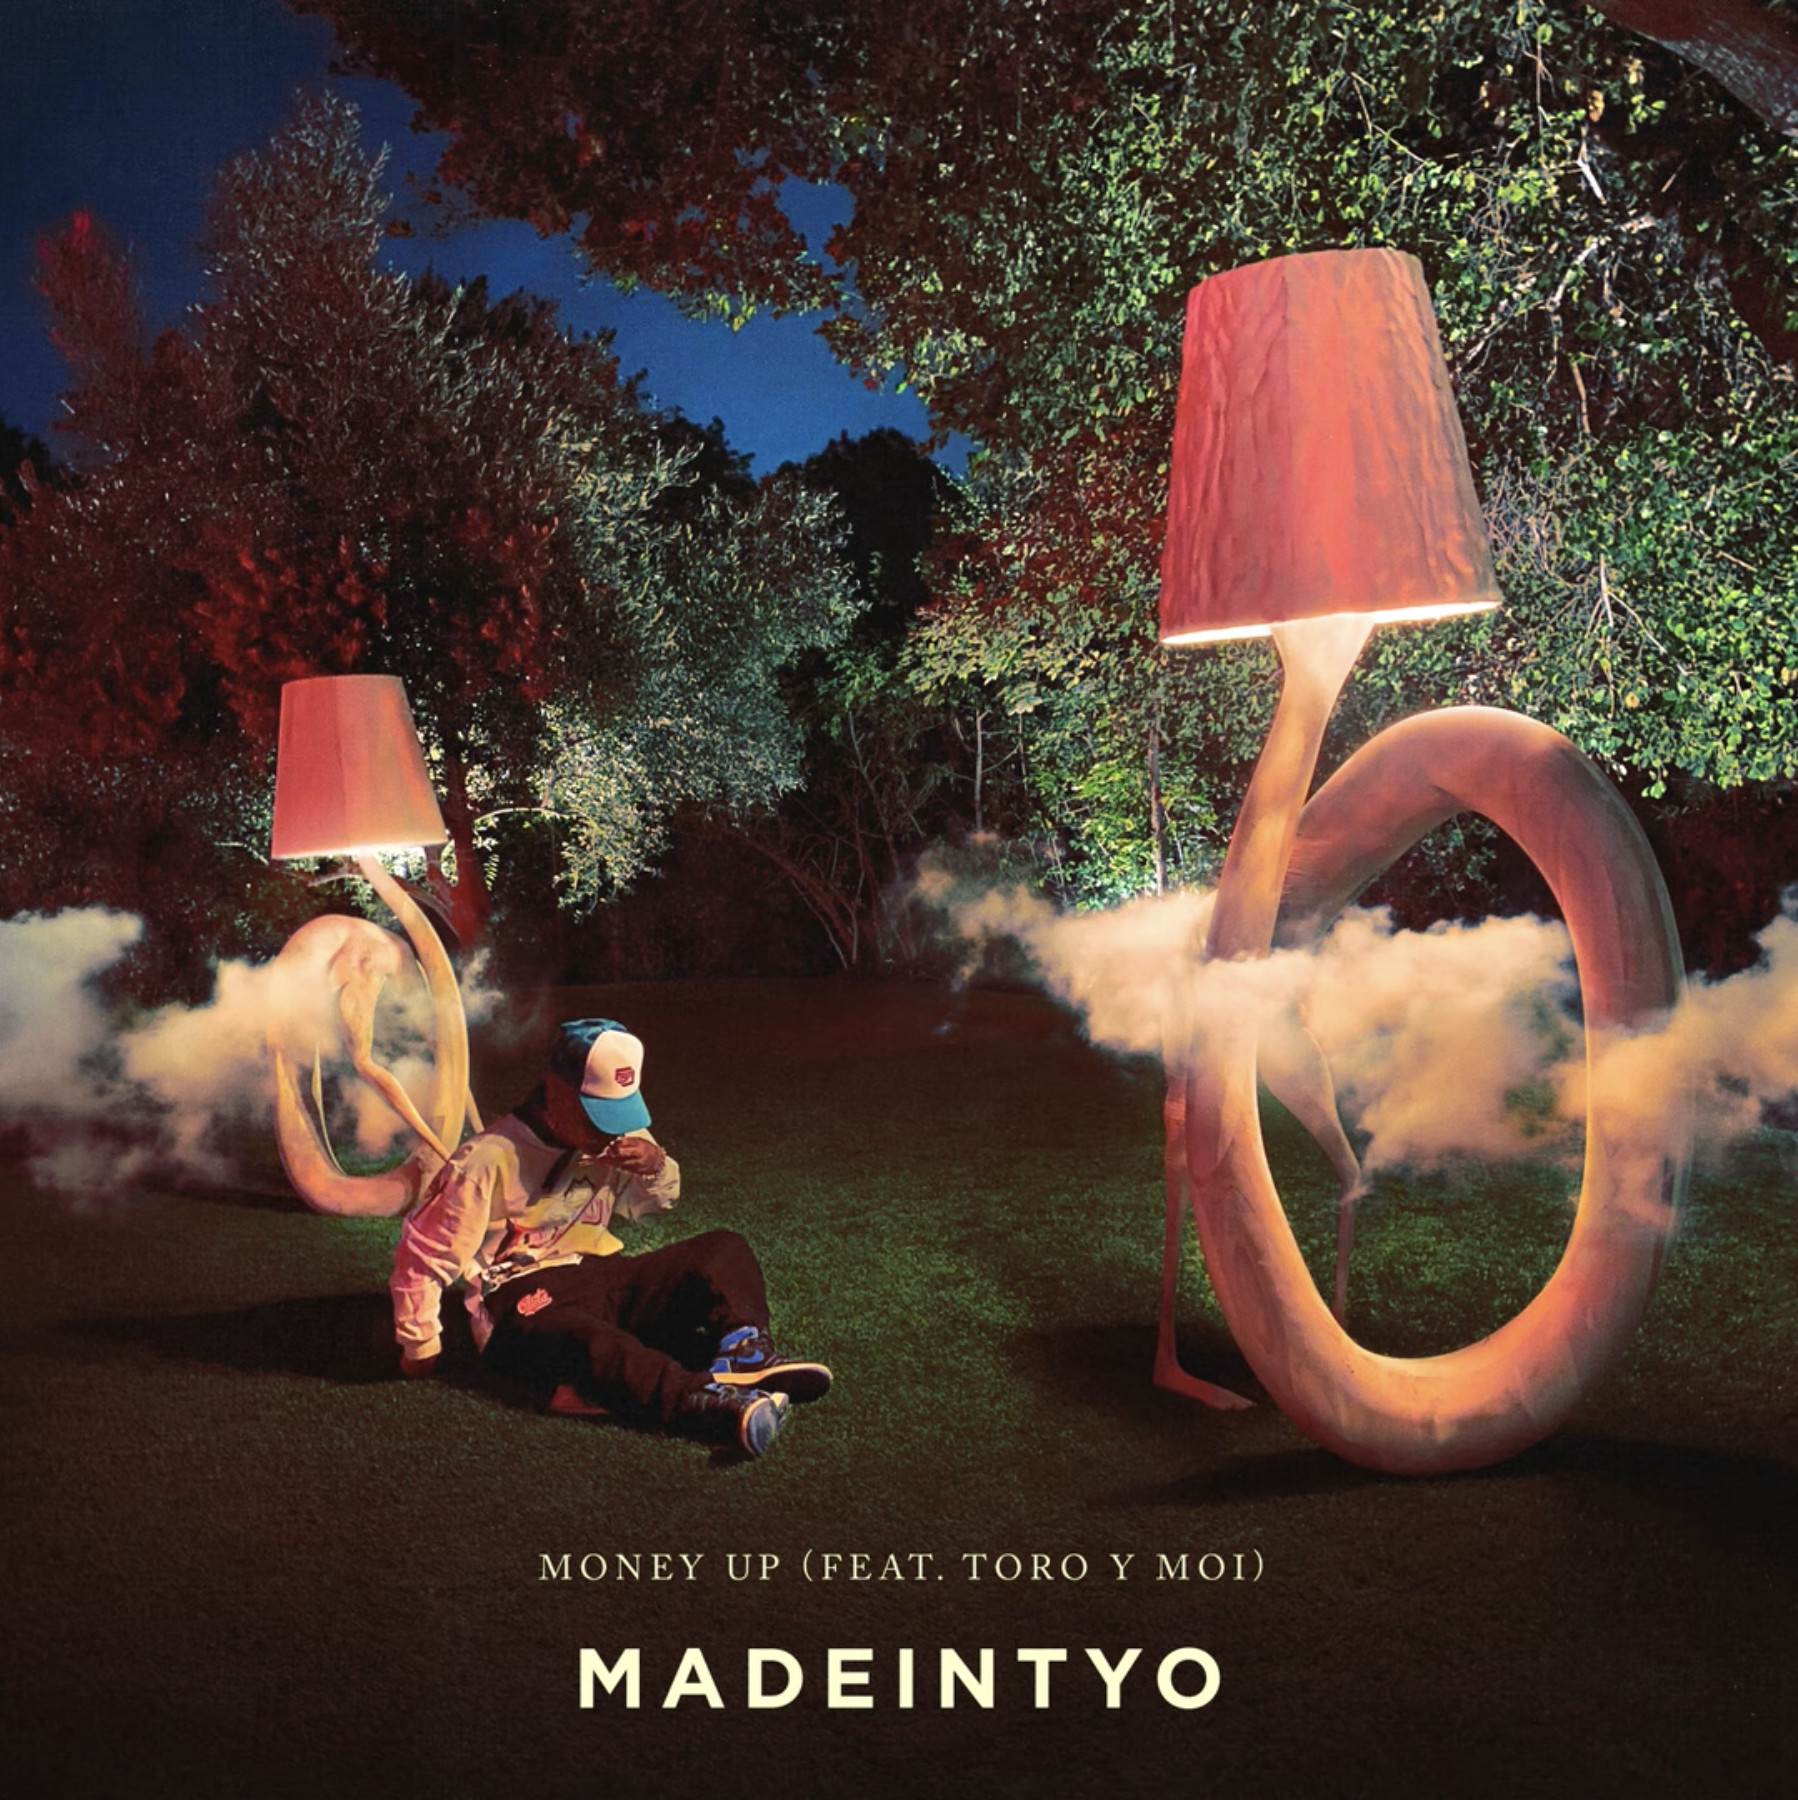 MadeinTYO & Toro Y Moi Get Their “Money Up” In Brand New Single